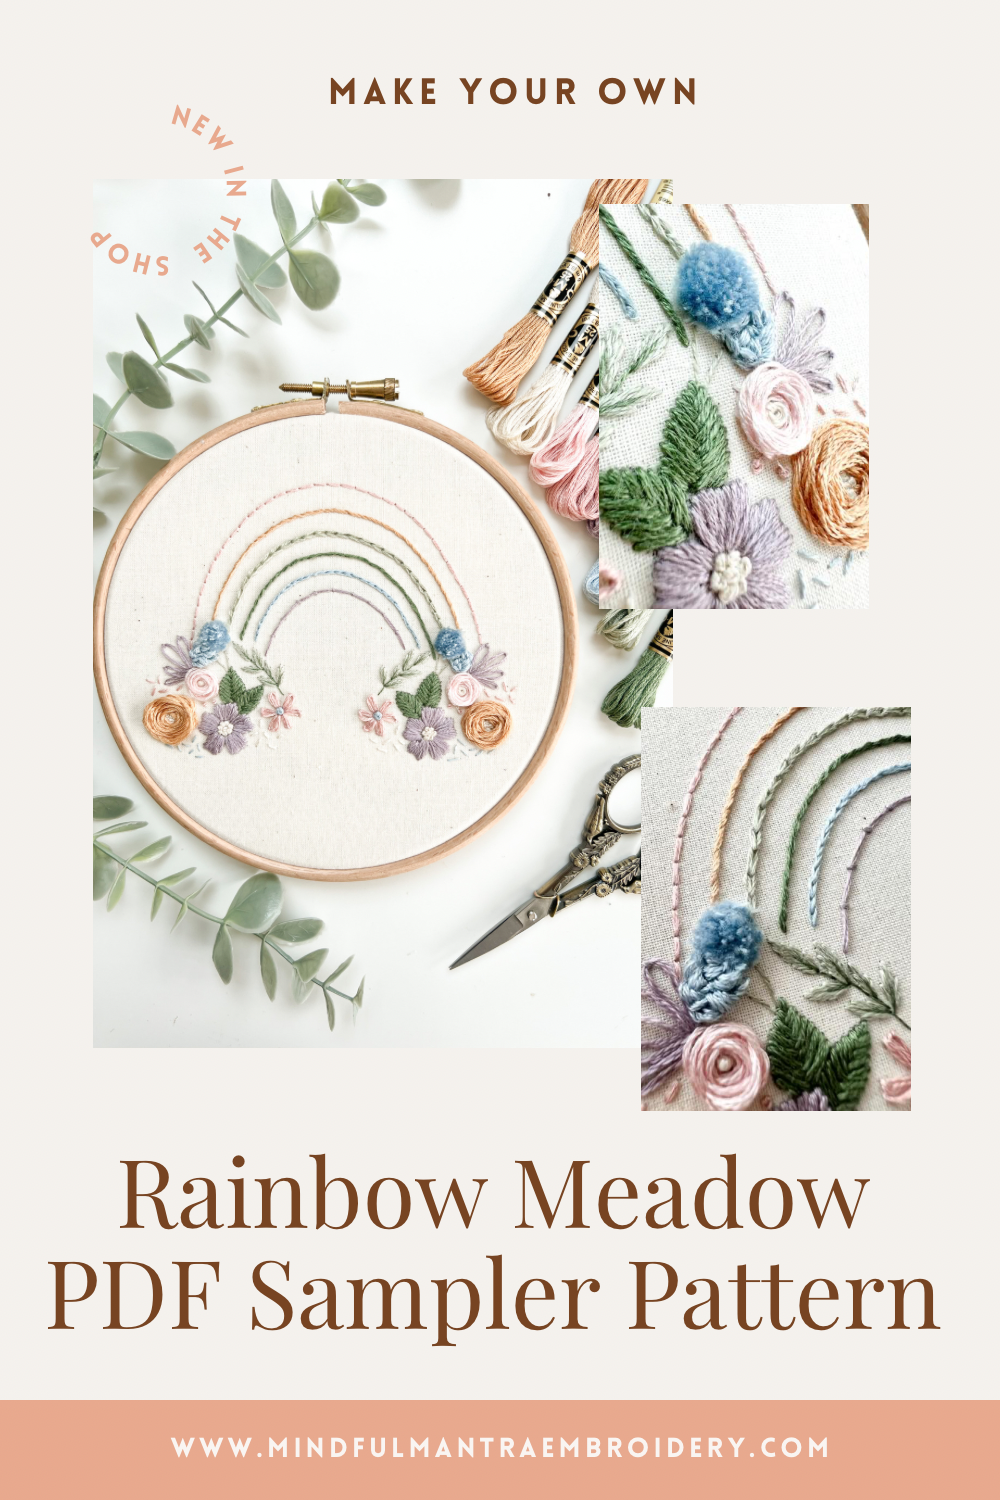 New PDF Embroidery Pattern and Kit : Rainbow Meadow